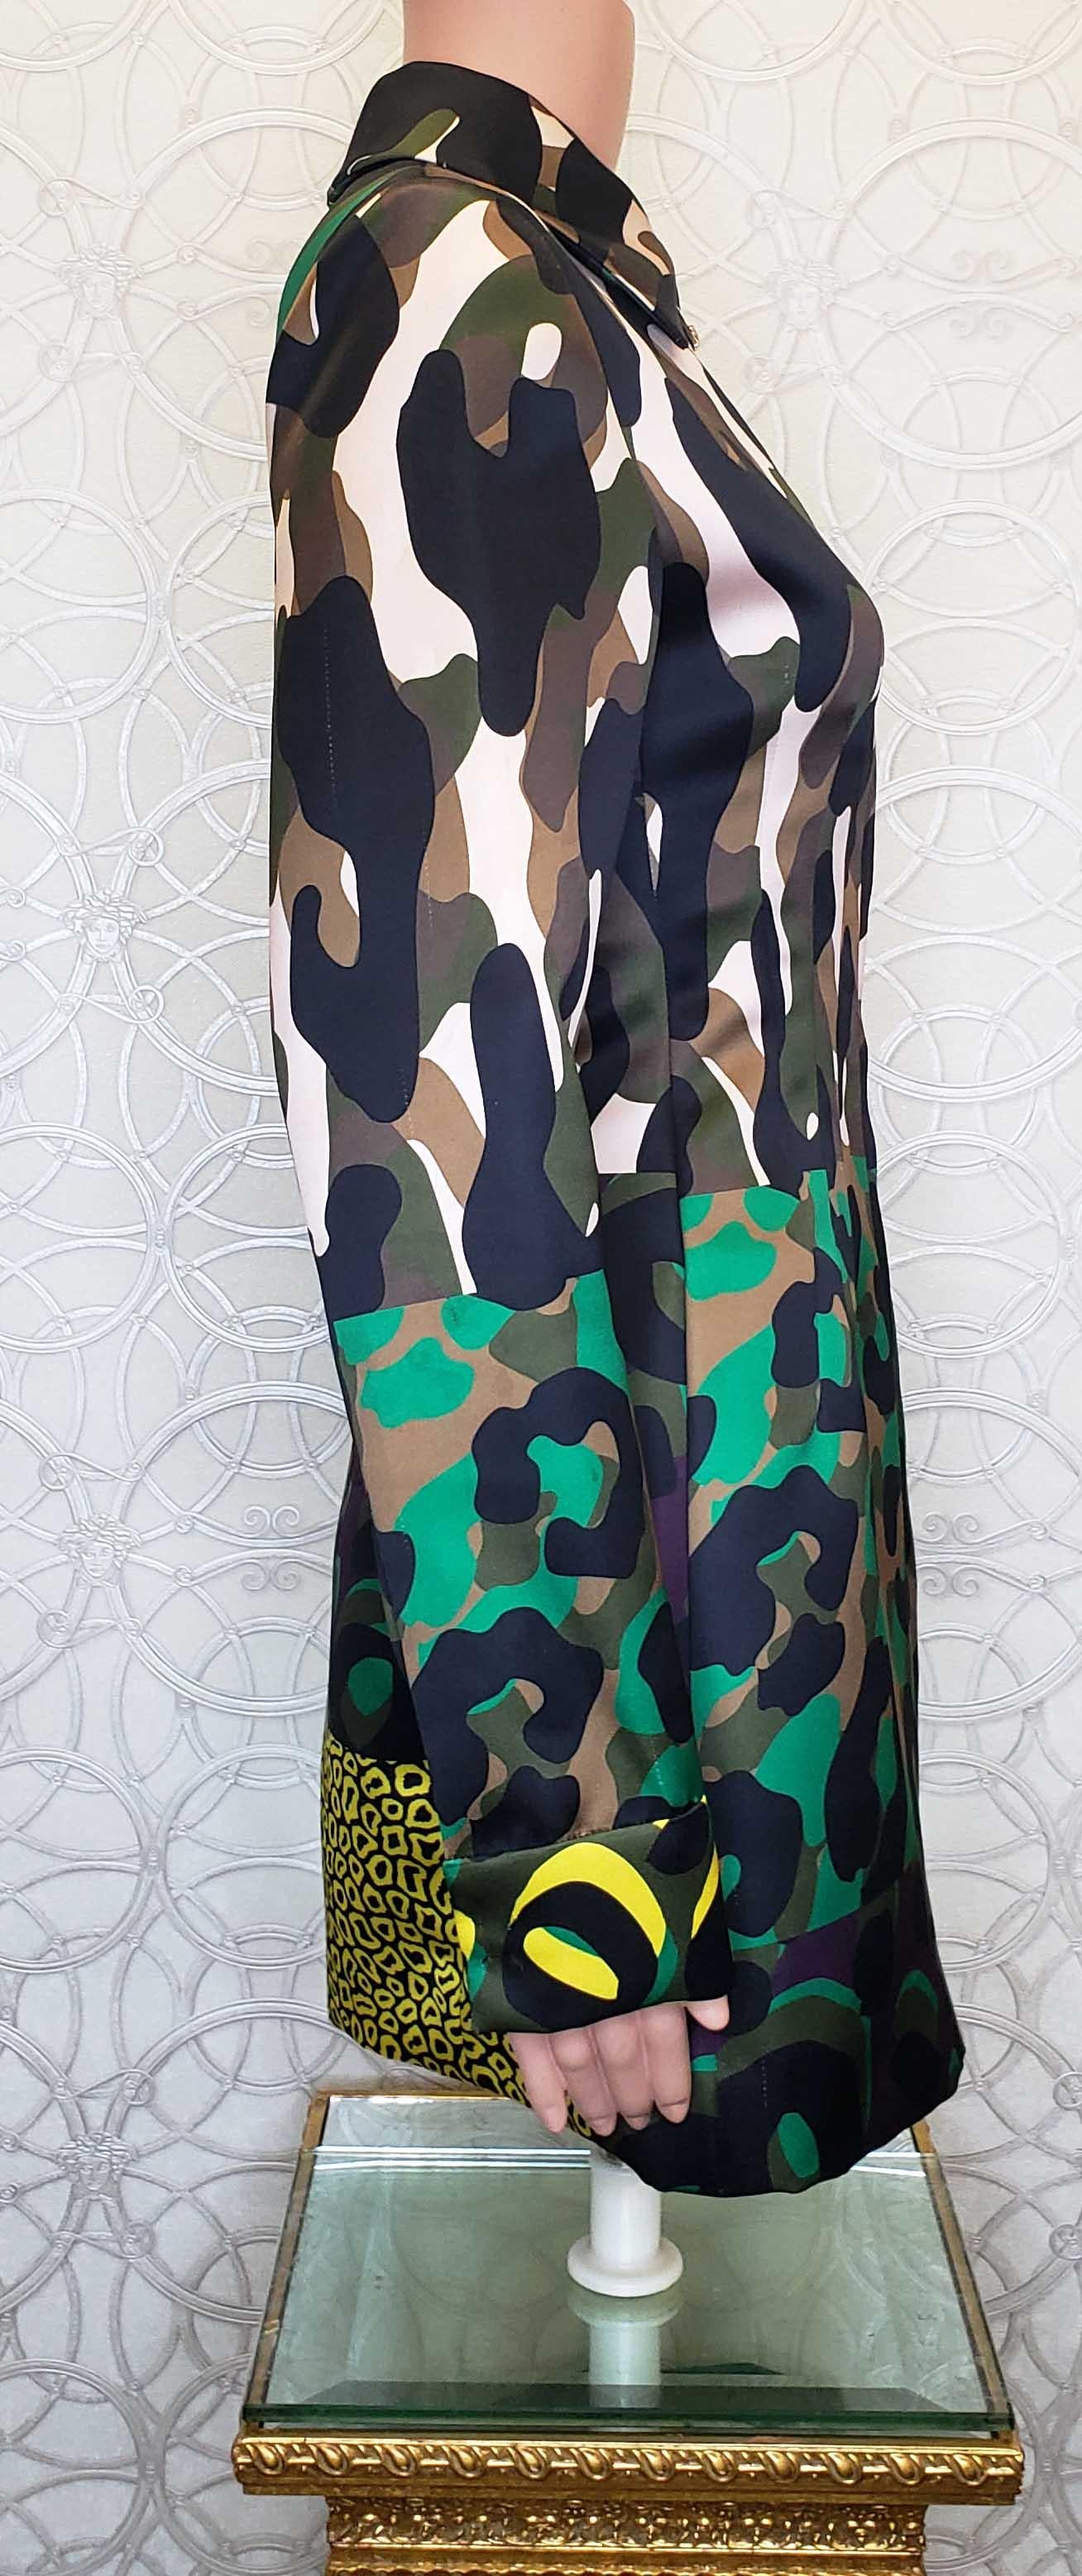 S/S 2016 L # 31 NEW VERSACE MULTI COLOR MILITARY Coat 38 - 2 For Sale 5